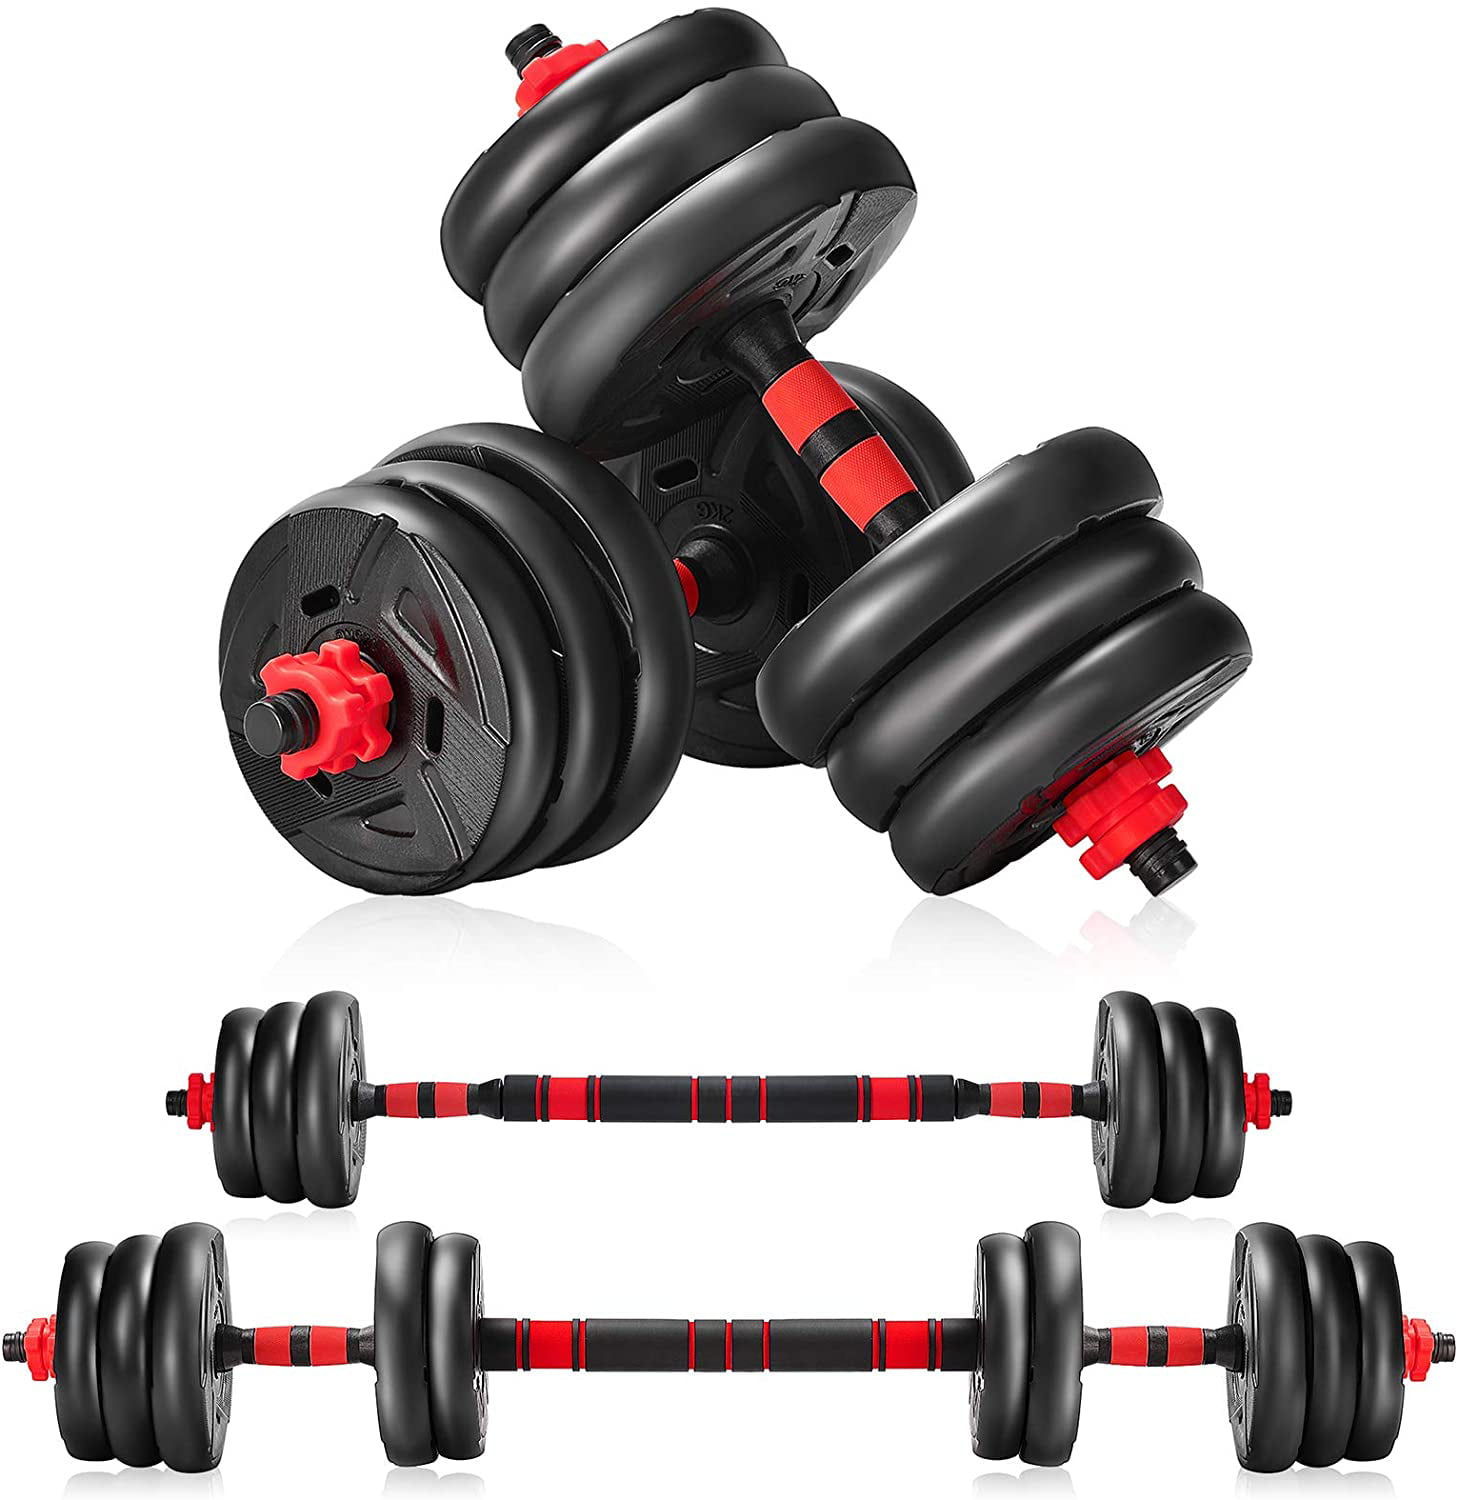 Totall 22-88LB Weight Dumbbell Set Adjustable Gym Barbell Plates Body Workout US 